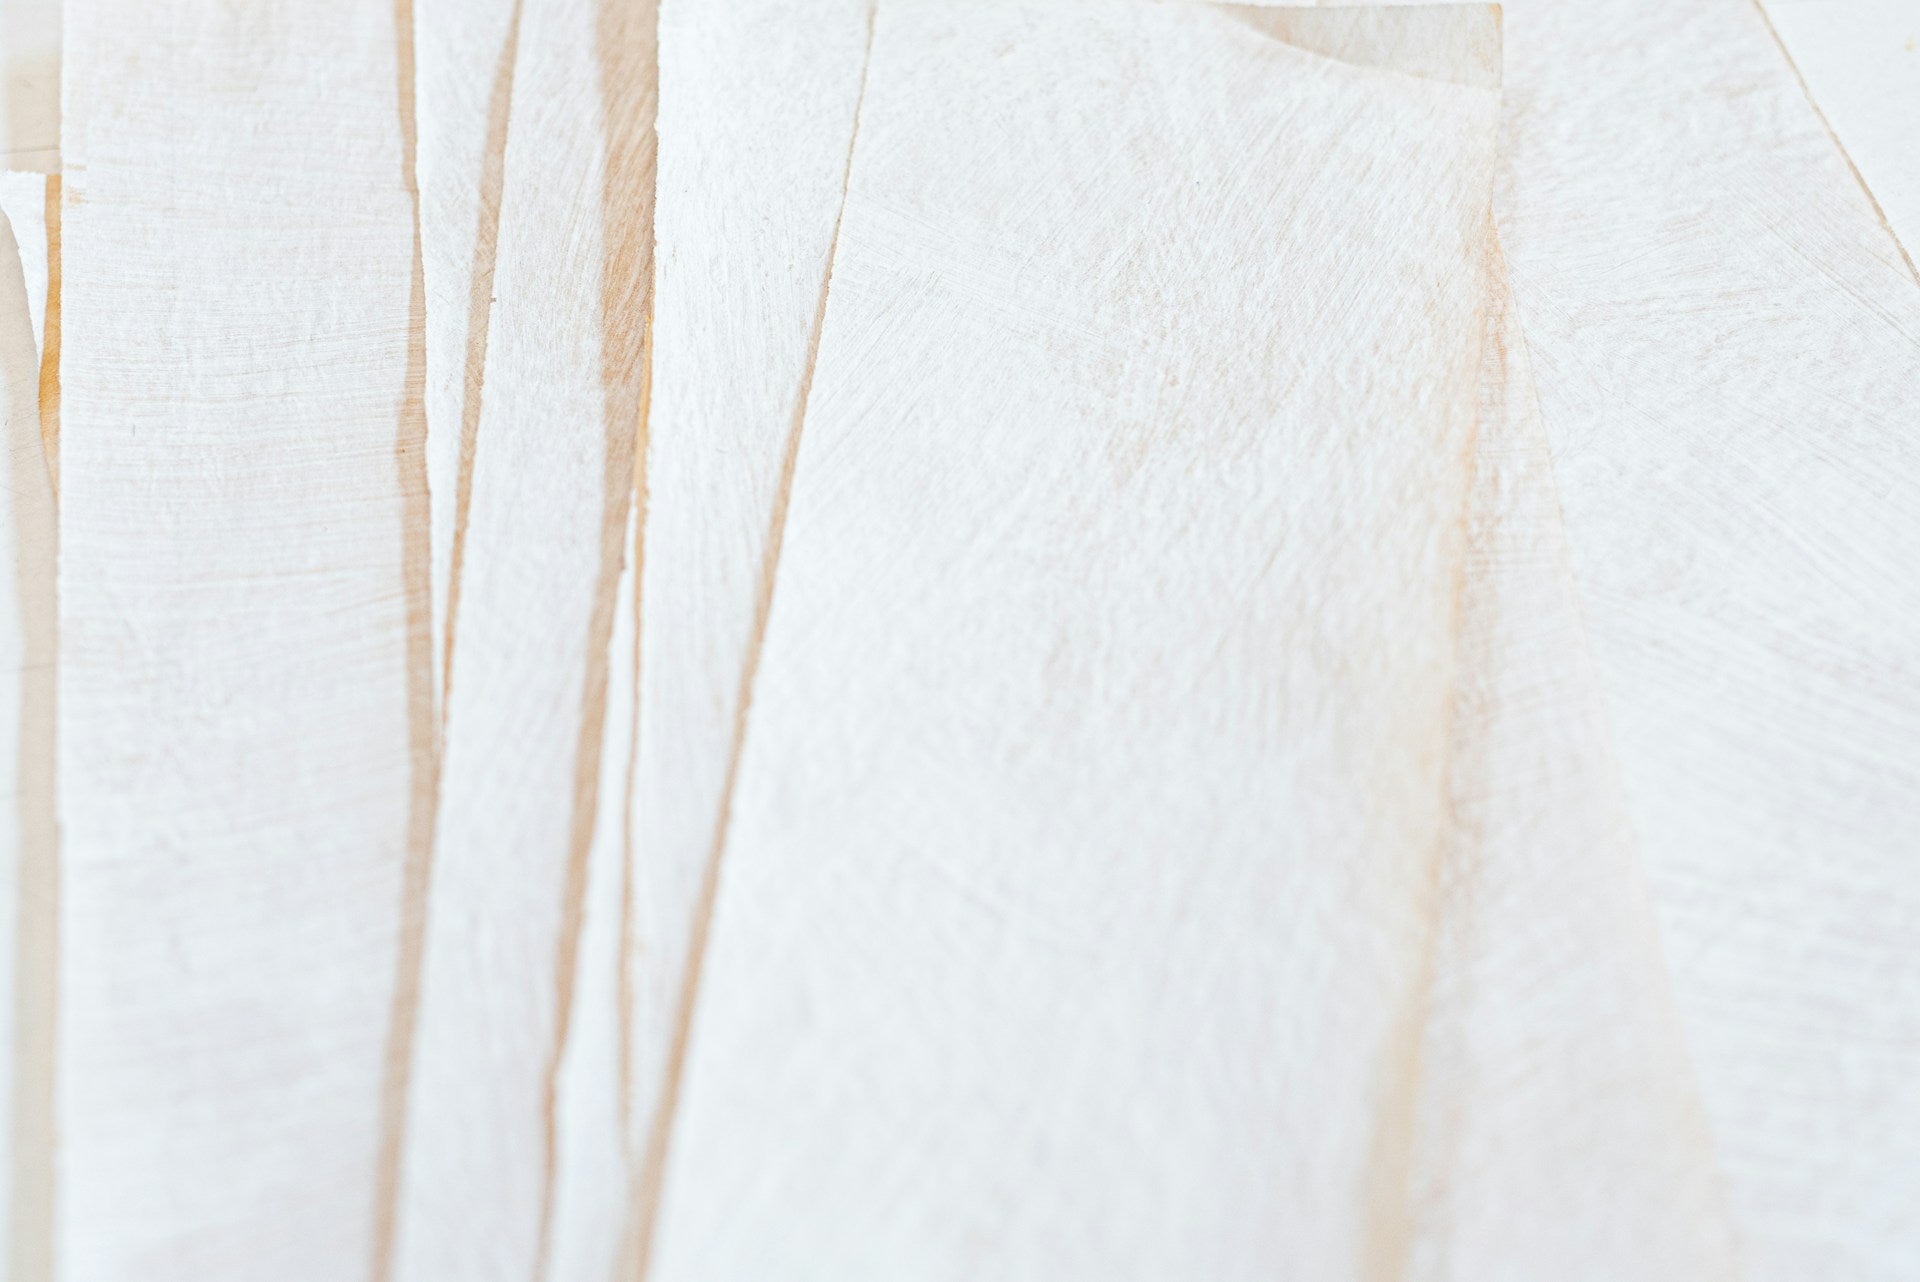 A piece of textured paper with beige organic stripes on it.